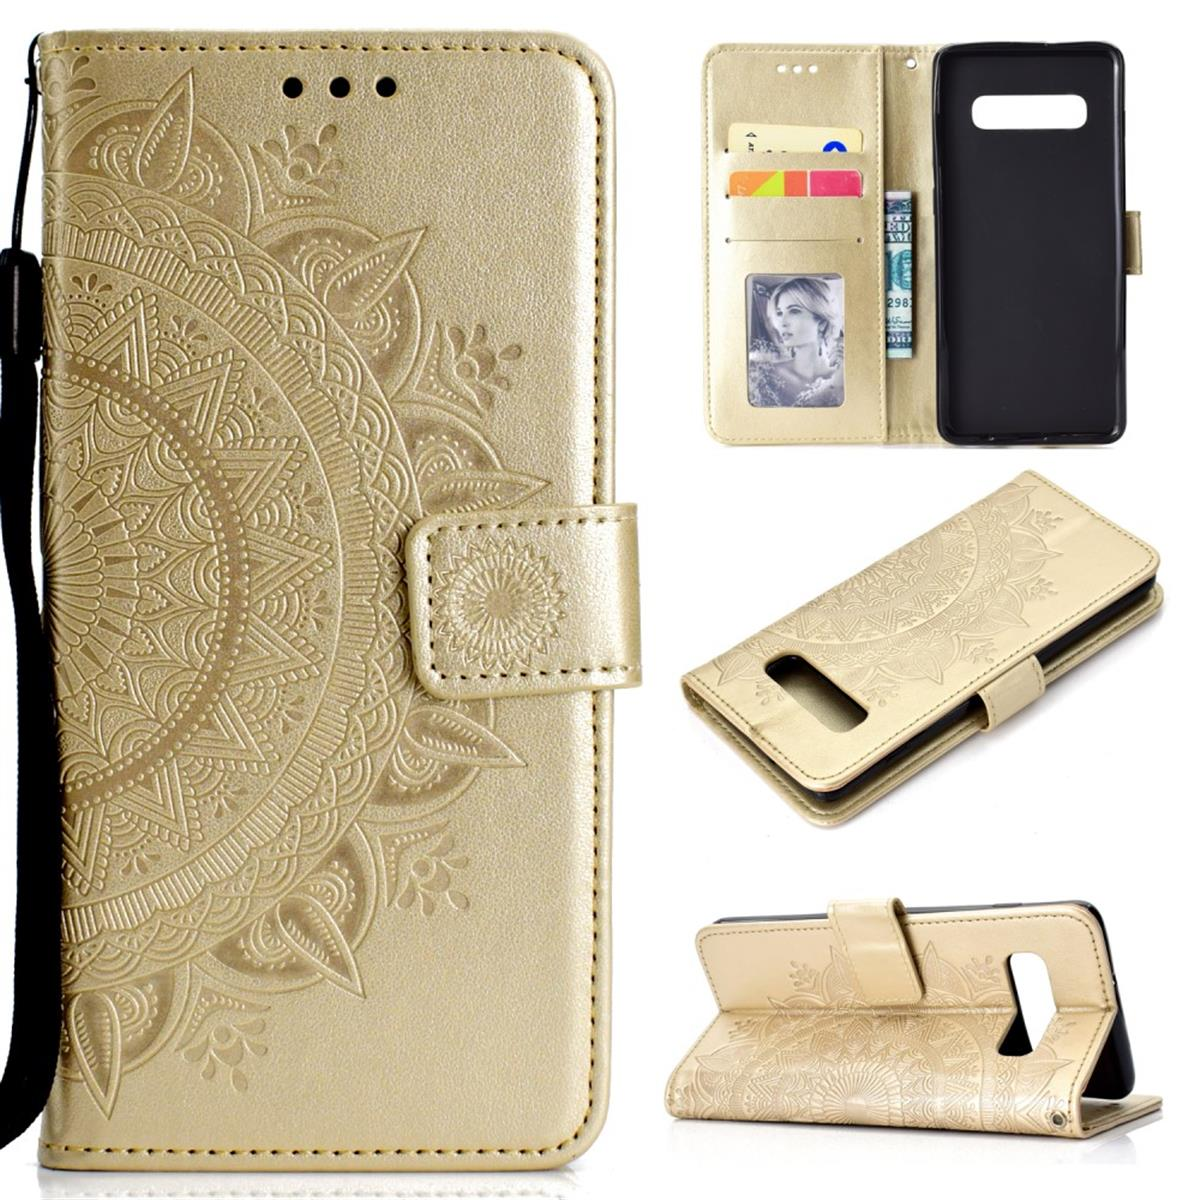 COVERKINGZ Klapphülle mit Mandala [Plus], Muster, Galaxy S10+ Samsung, Gold Bookcover